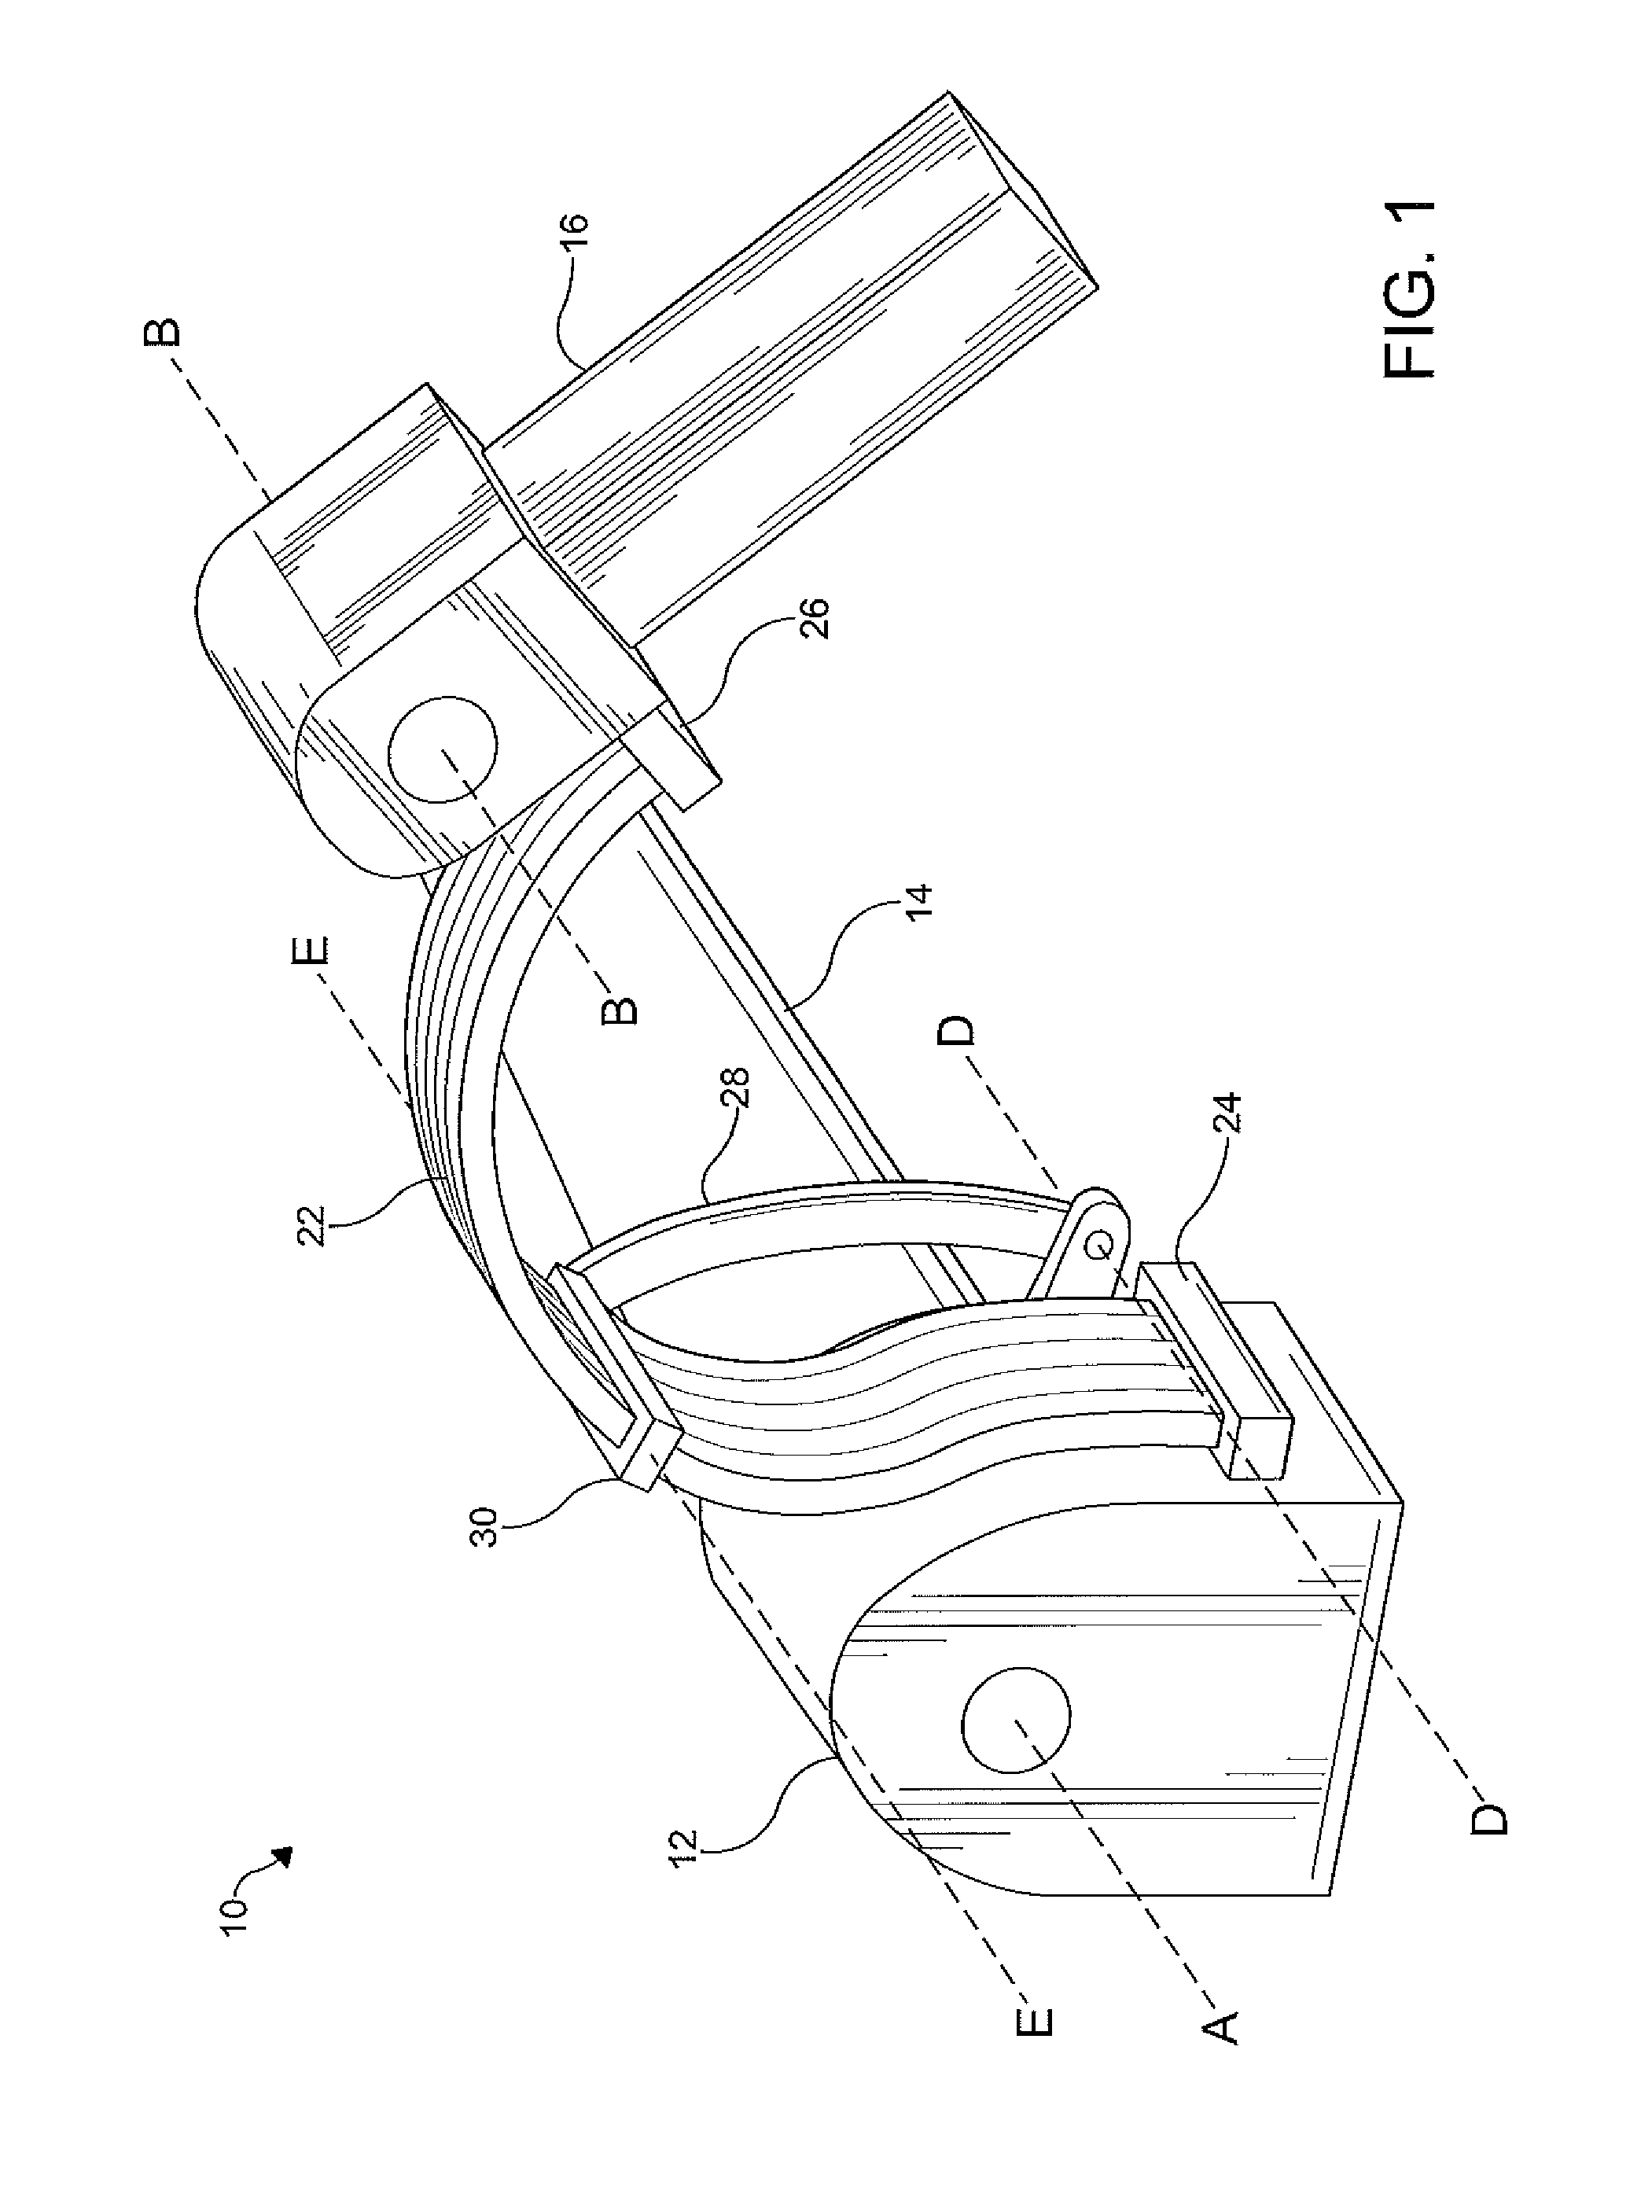 Line management system and a method for routing flexible lines for a robot